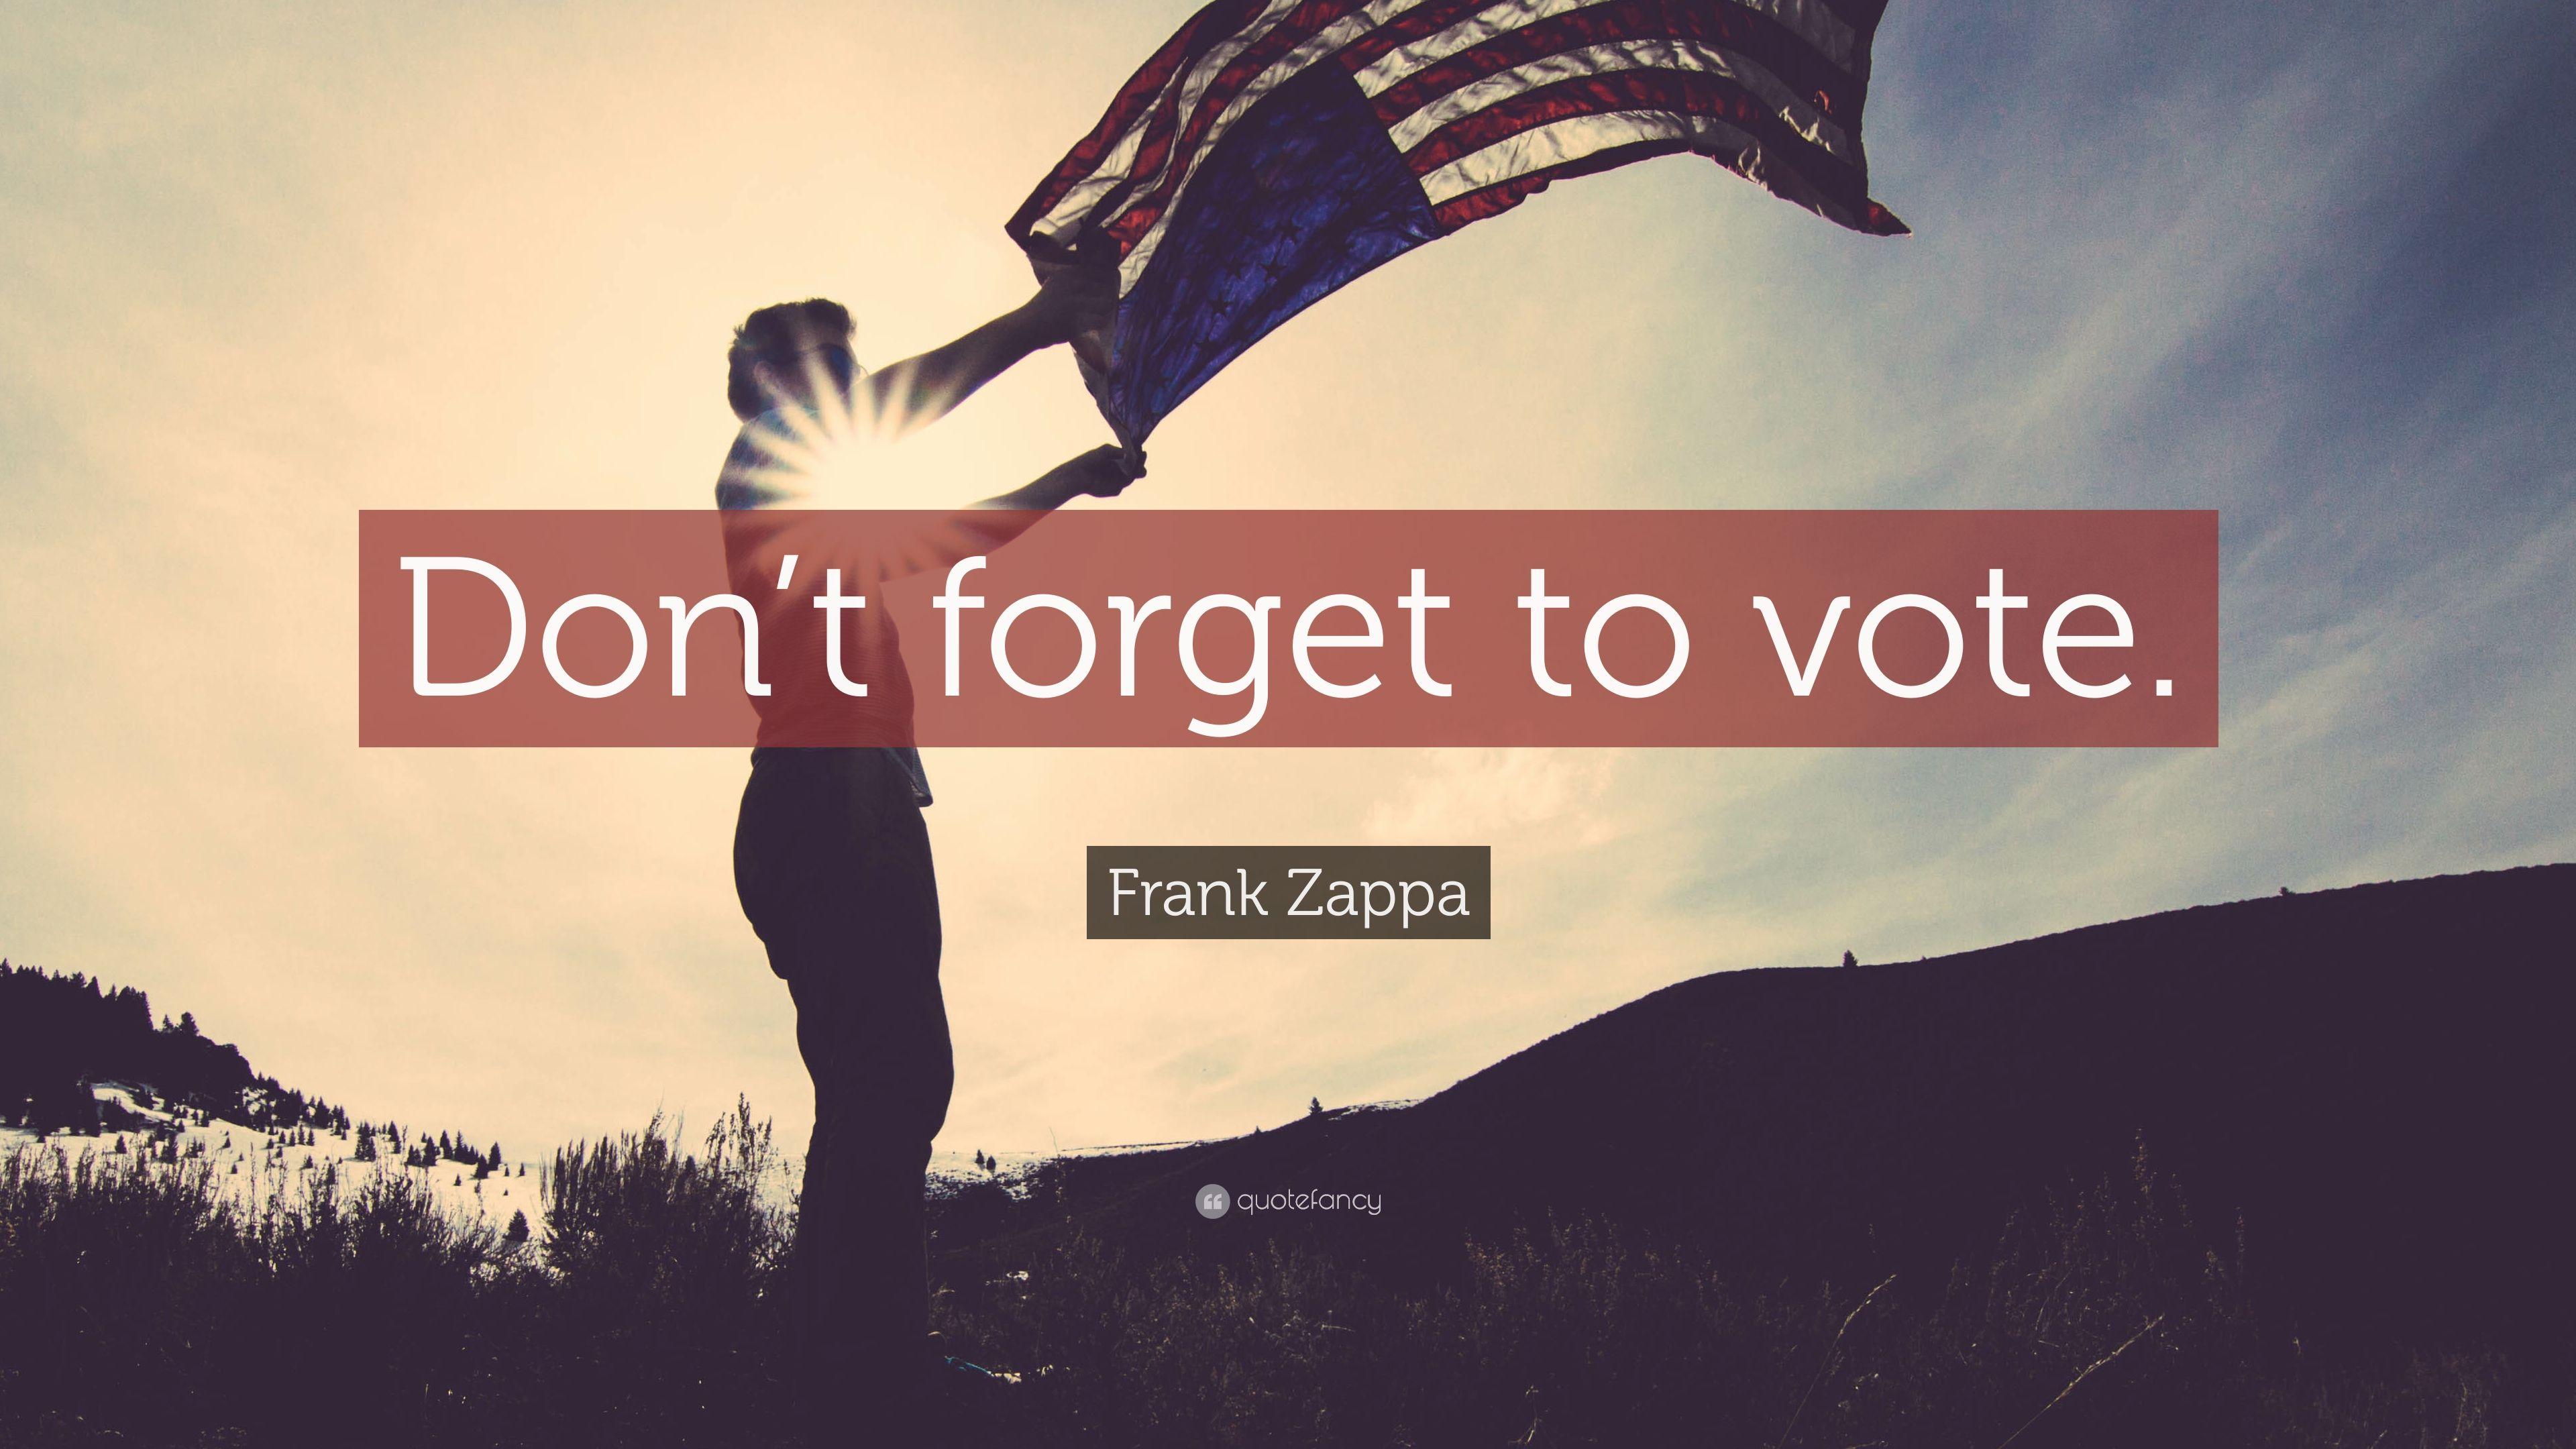 Frank Zappa Quote: “Don't forget to vote.” (14 wallpaper)